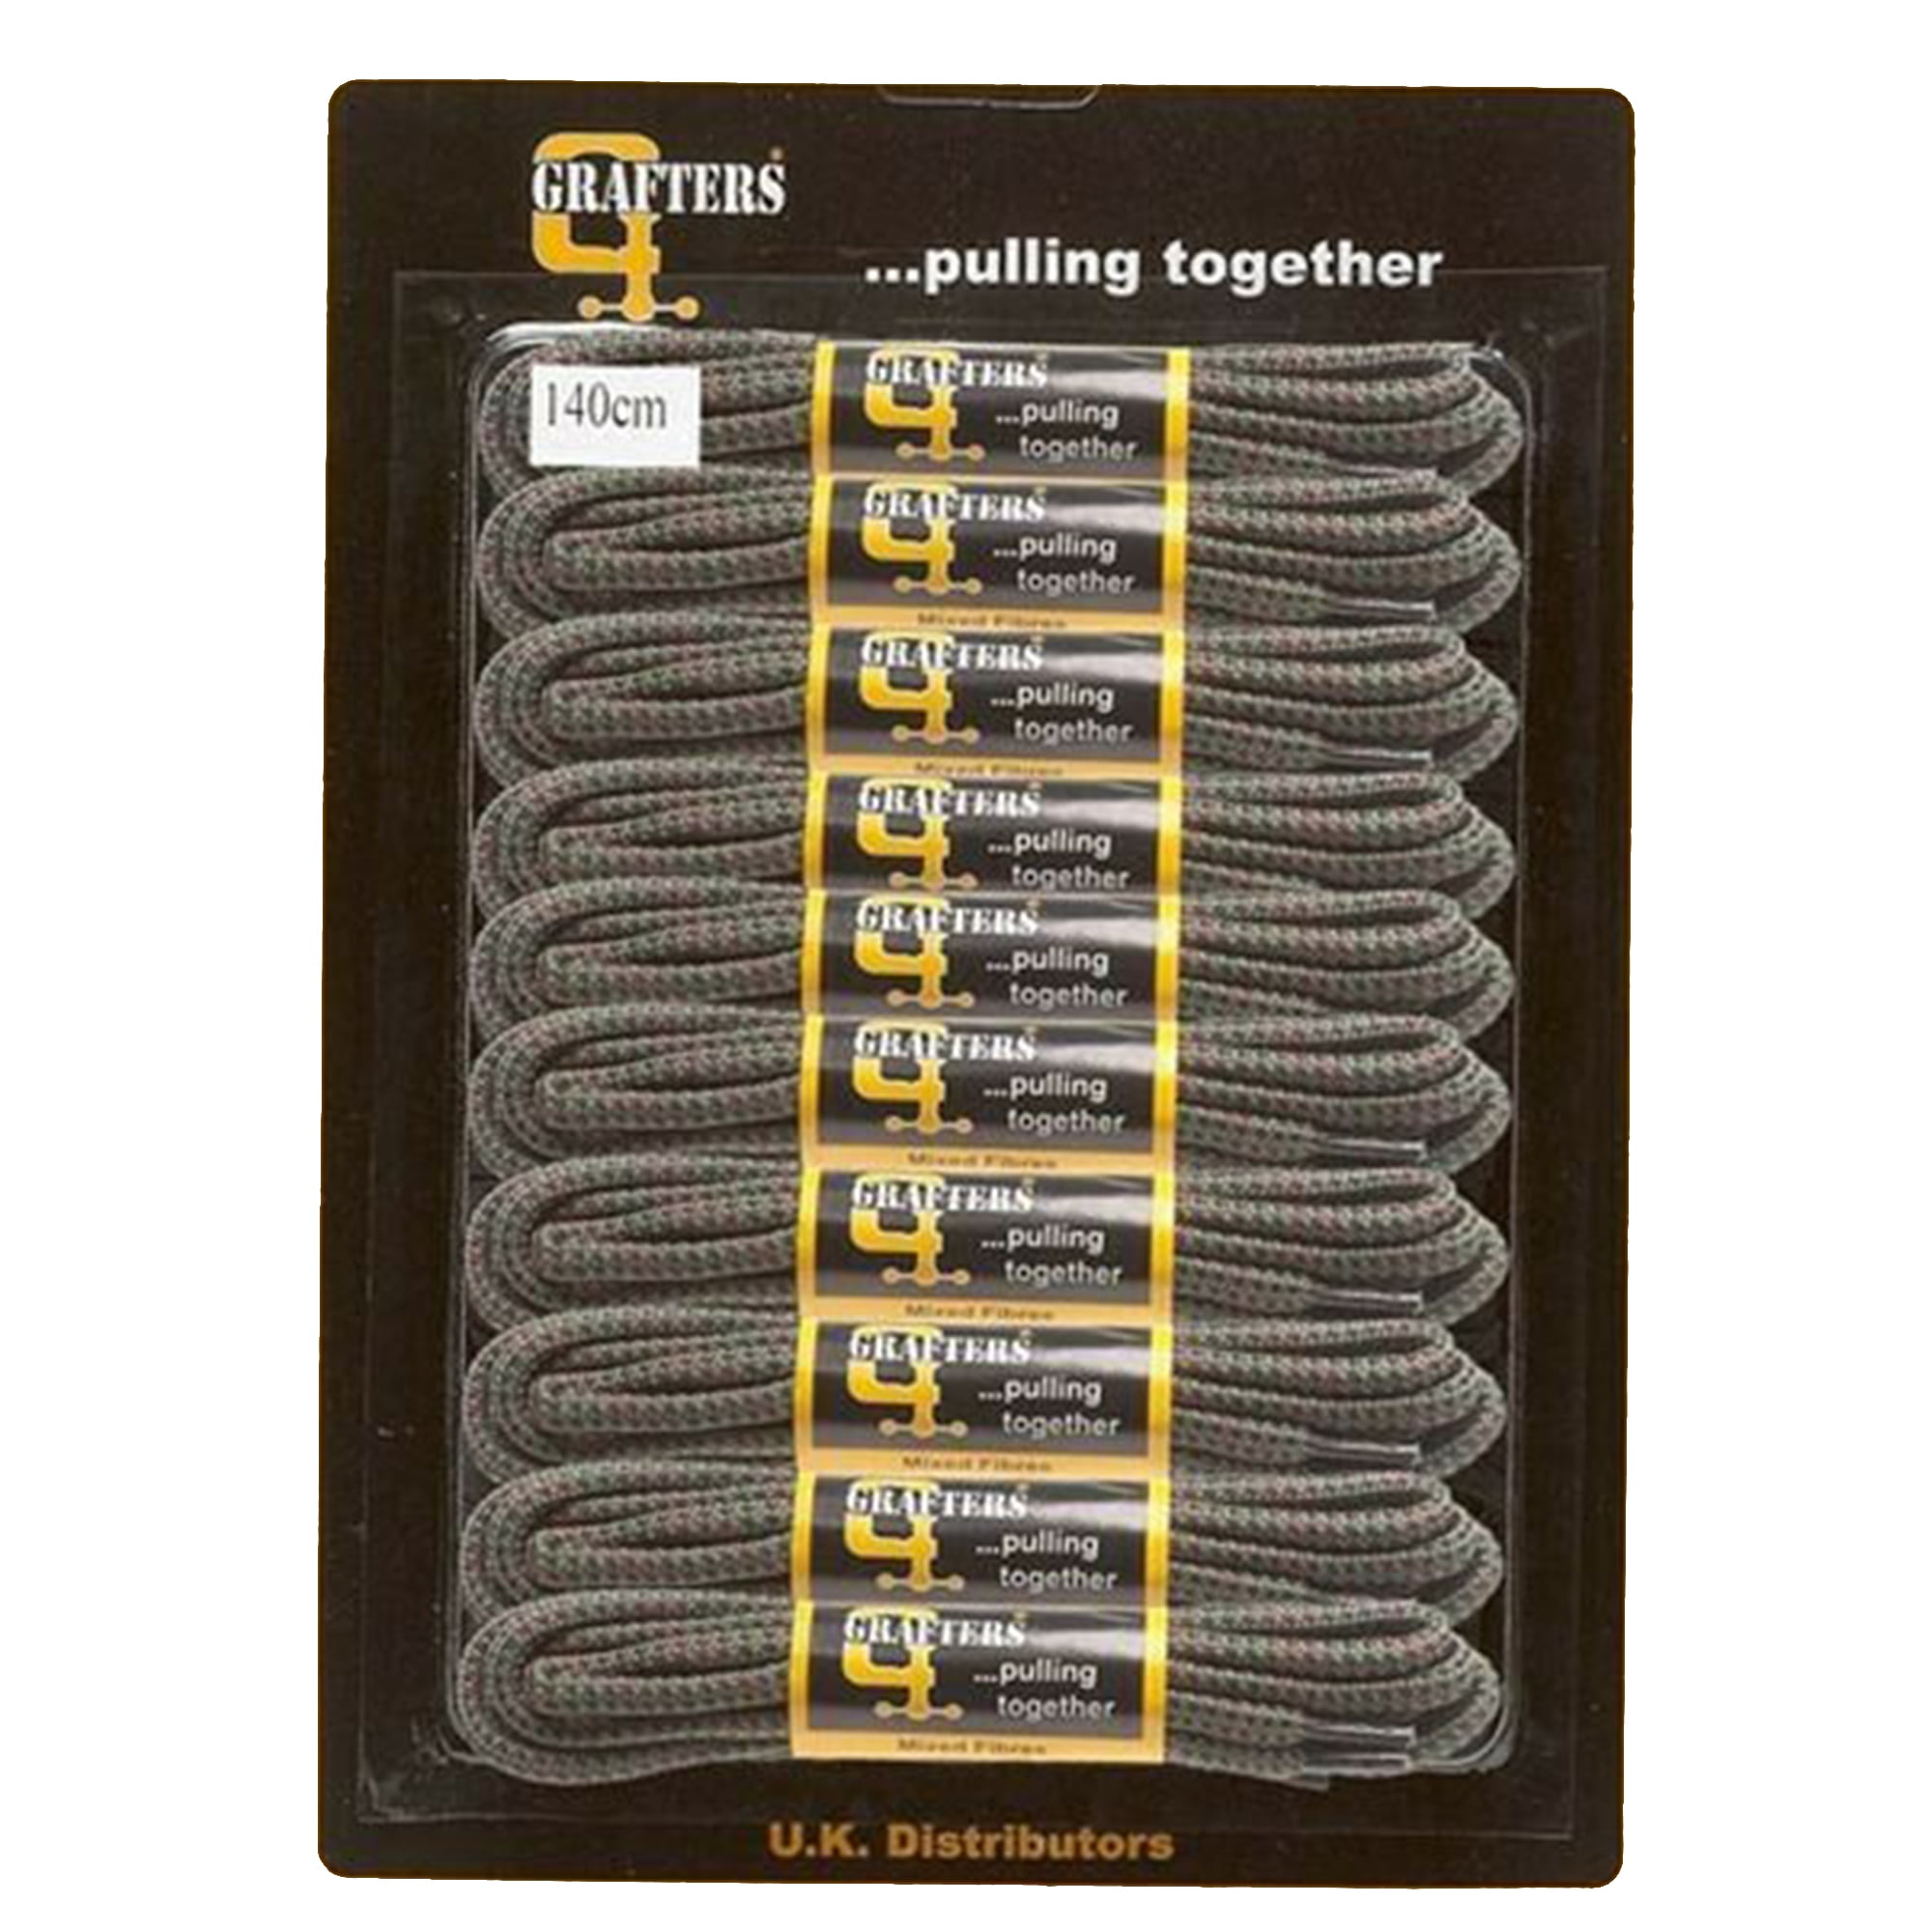 Grafters 12 pairs 140cm Round Replacement Shoe Boot Laces Assorted Textile